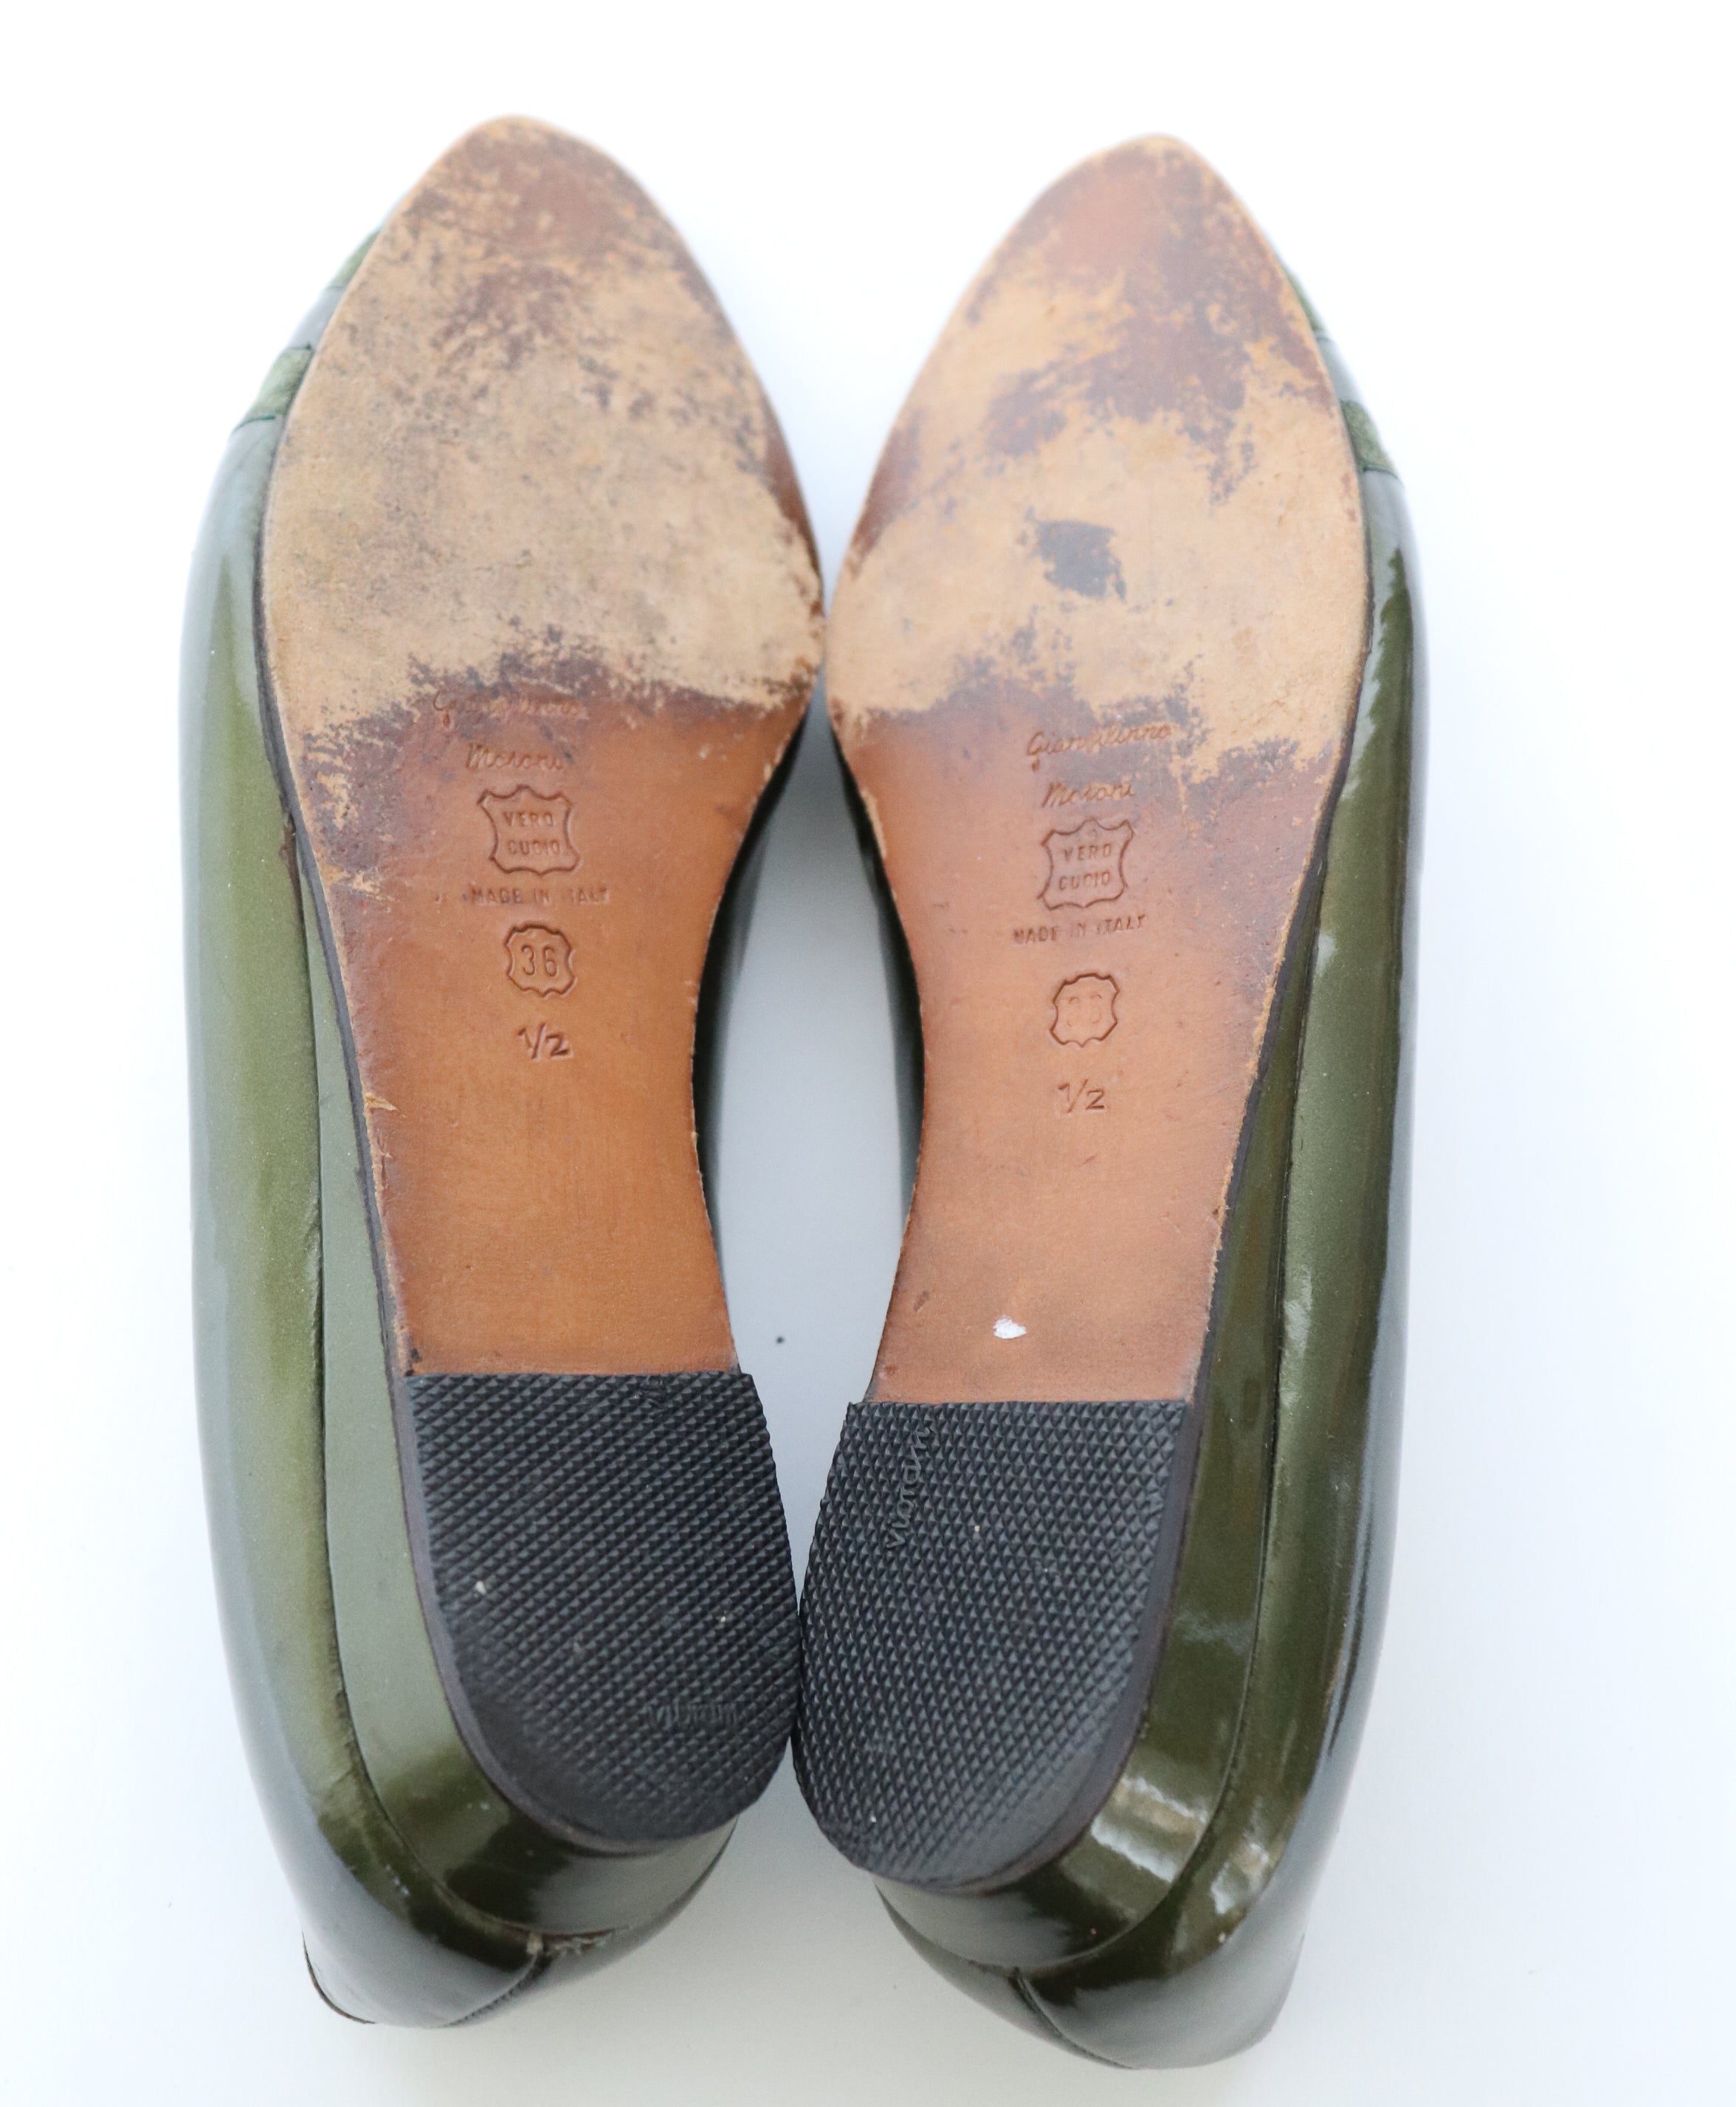 Green Wedge  Pumps - Vintage - Flat Leather Shoes Gianfilippo Moroni - Fit UK 3  / 36